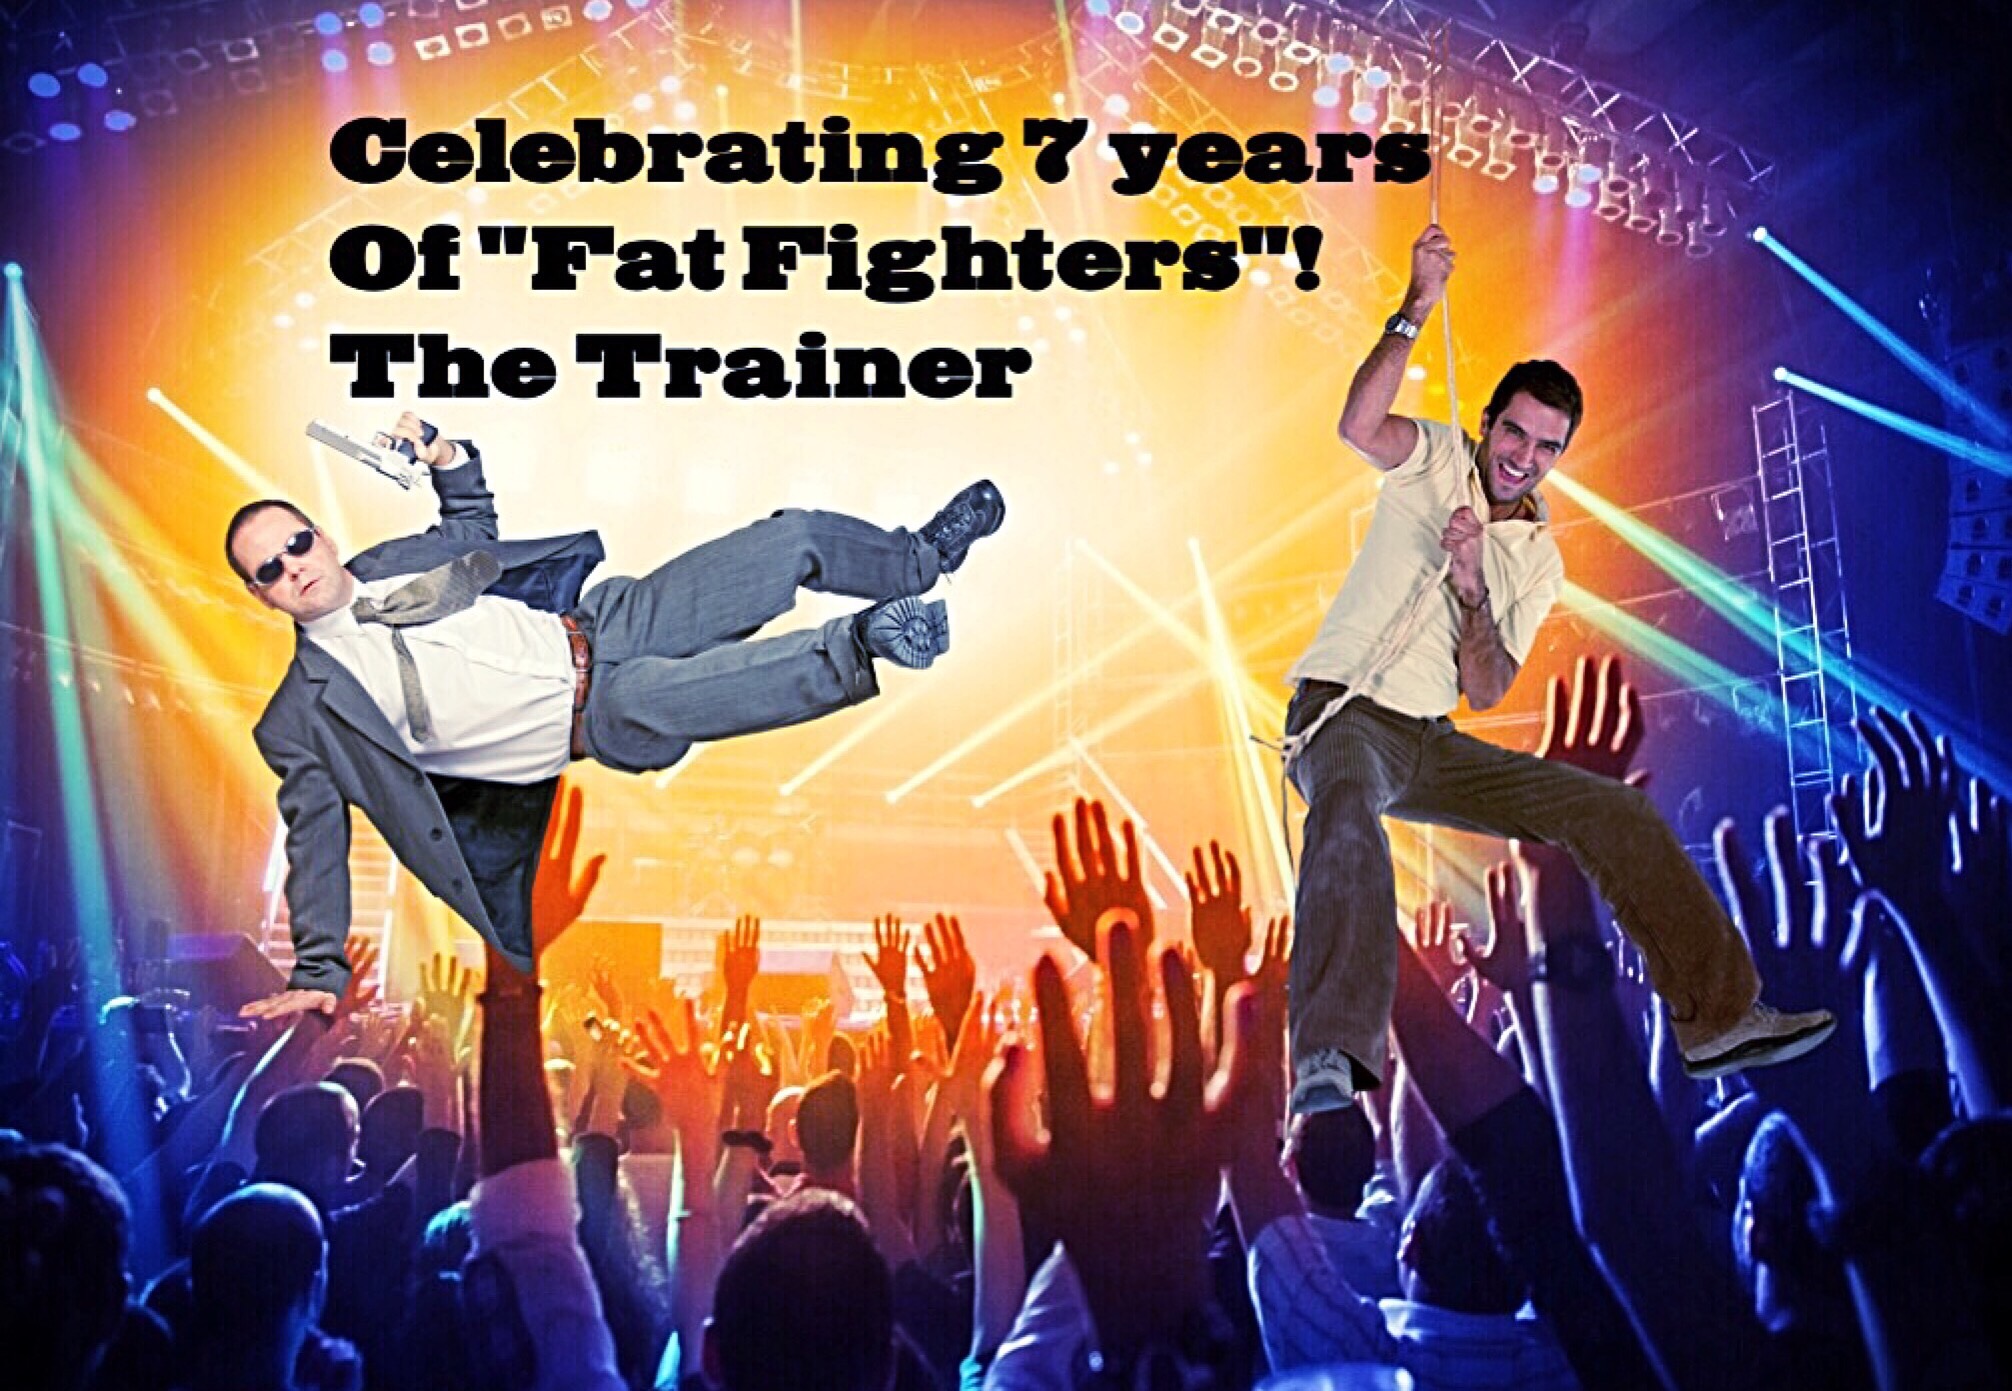 7 years! The Only “fat loss” contest in the entire Columbia River Gorge! The Trainer Boxing/Functional Training Club Hood River http://www.thetrainerhoodriver.com 